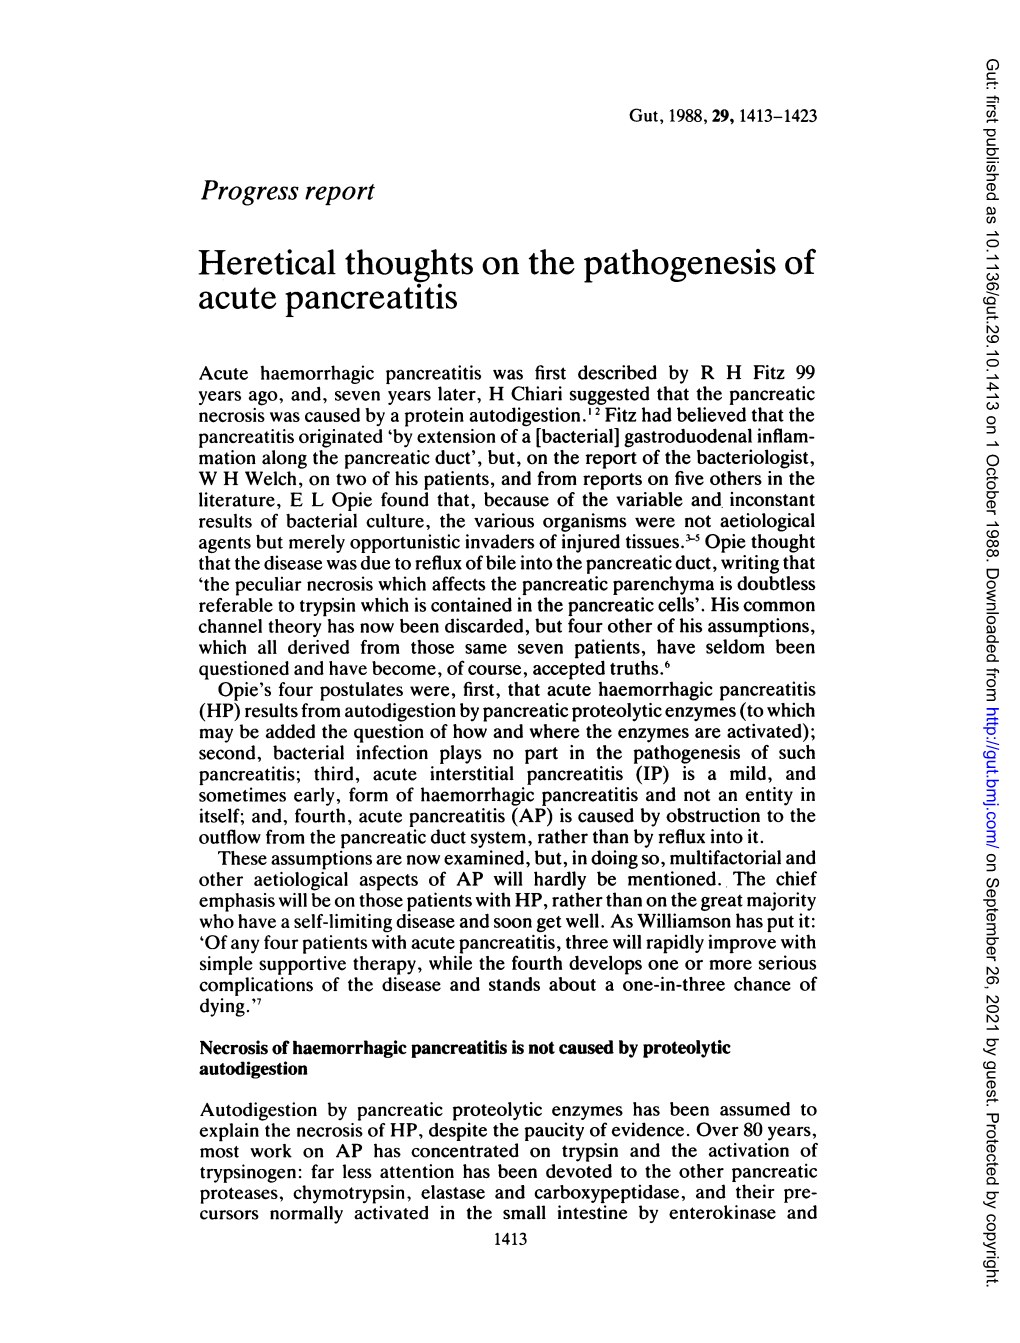 Heretical Thoughts on the Pathogenesis of Acute Pancreatitis